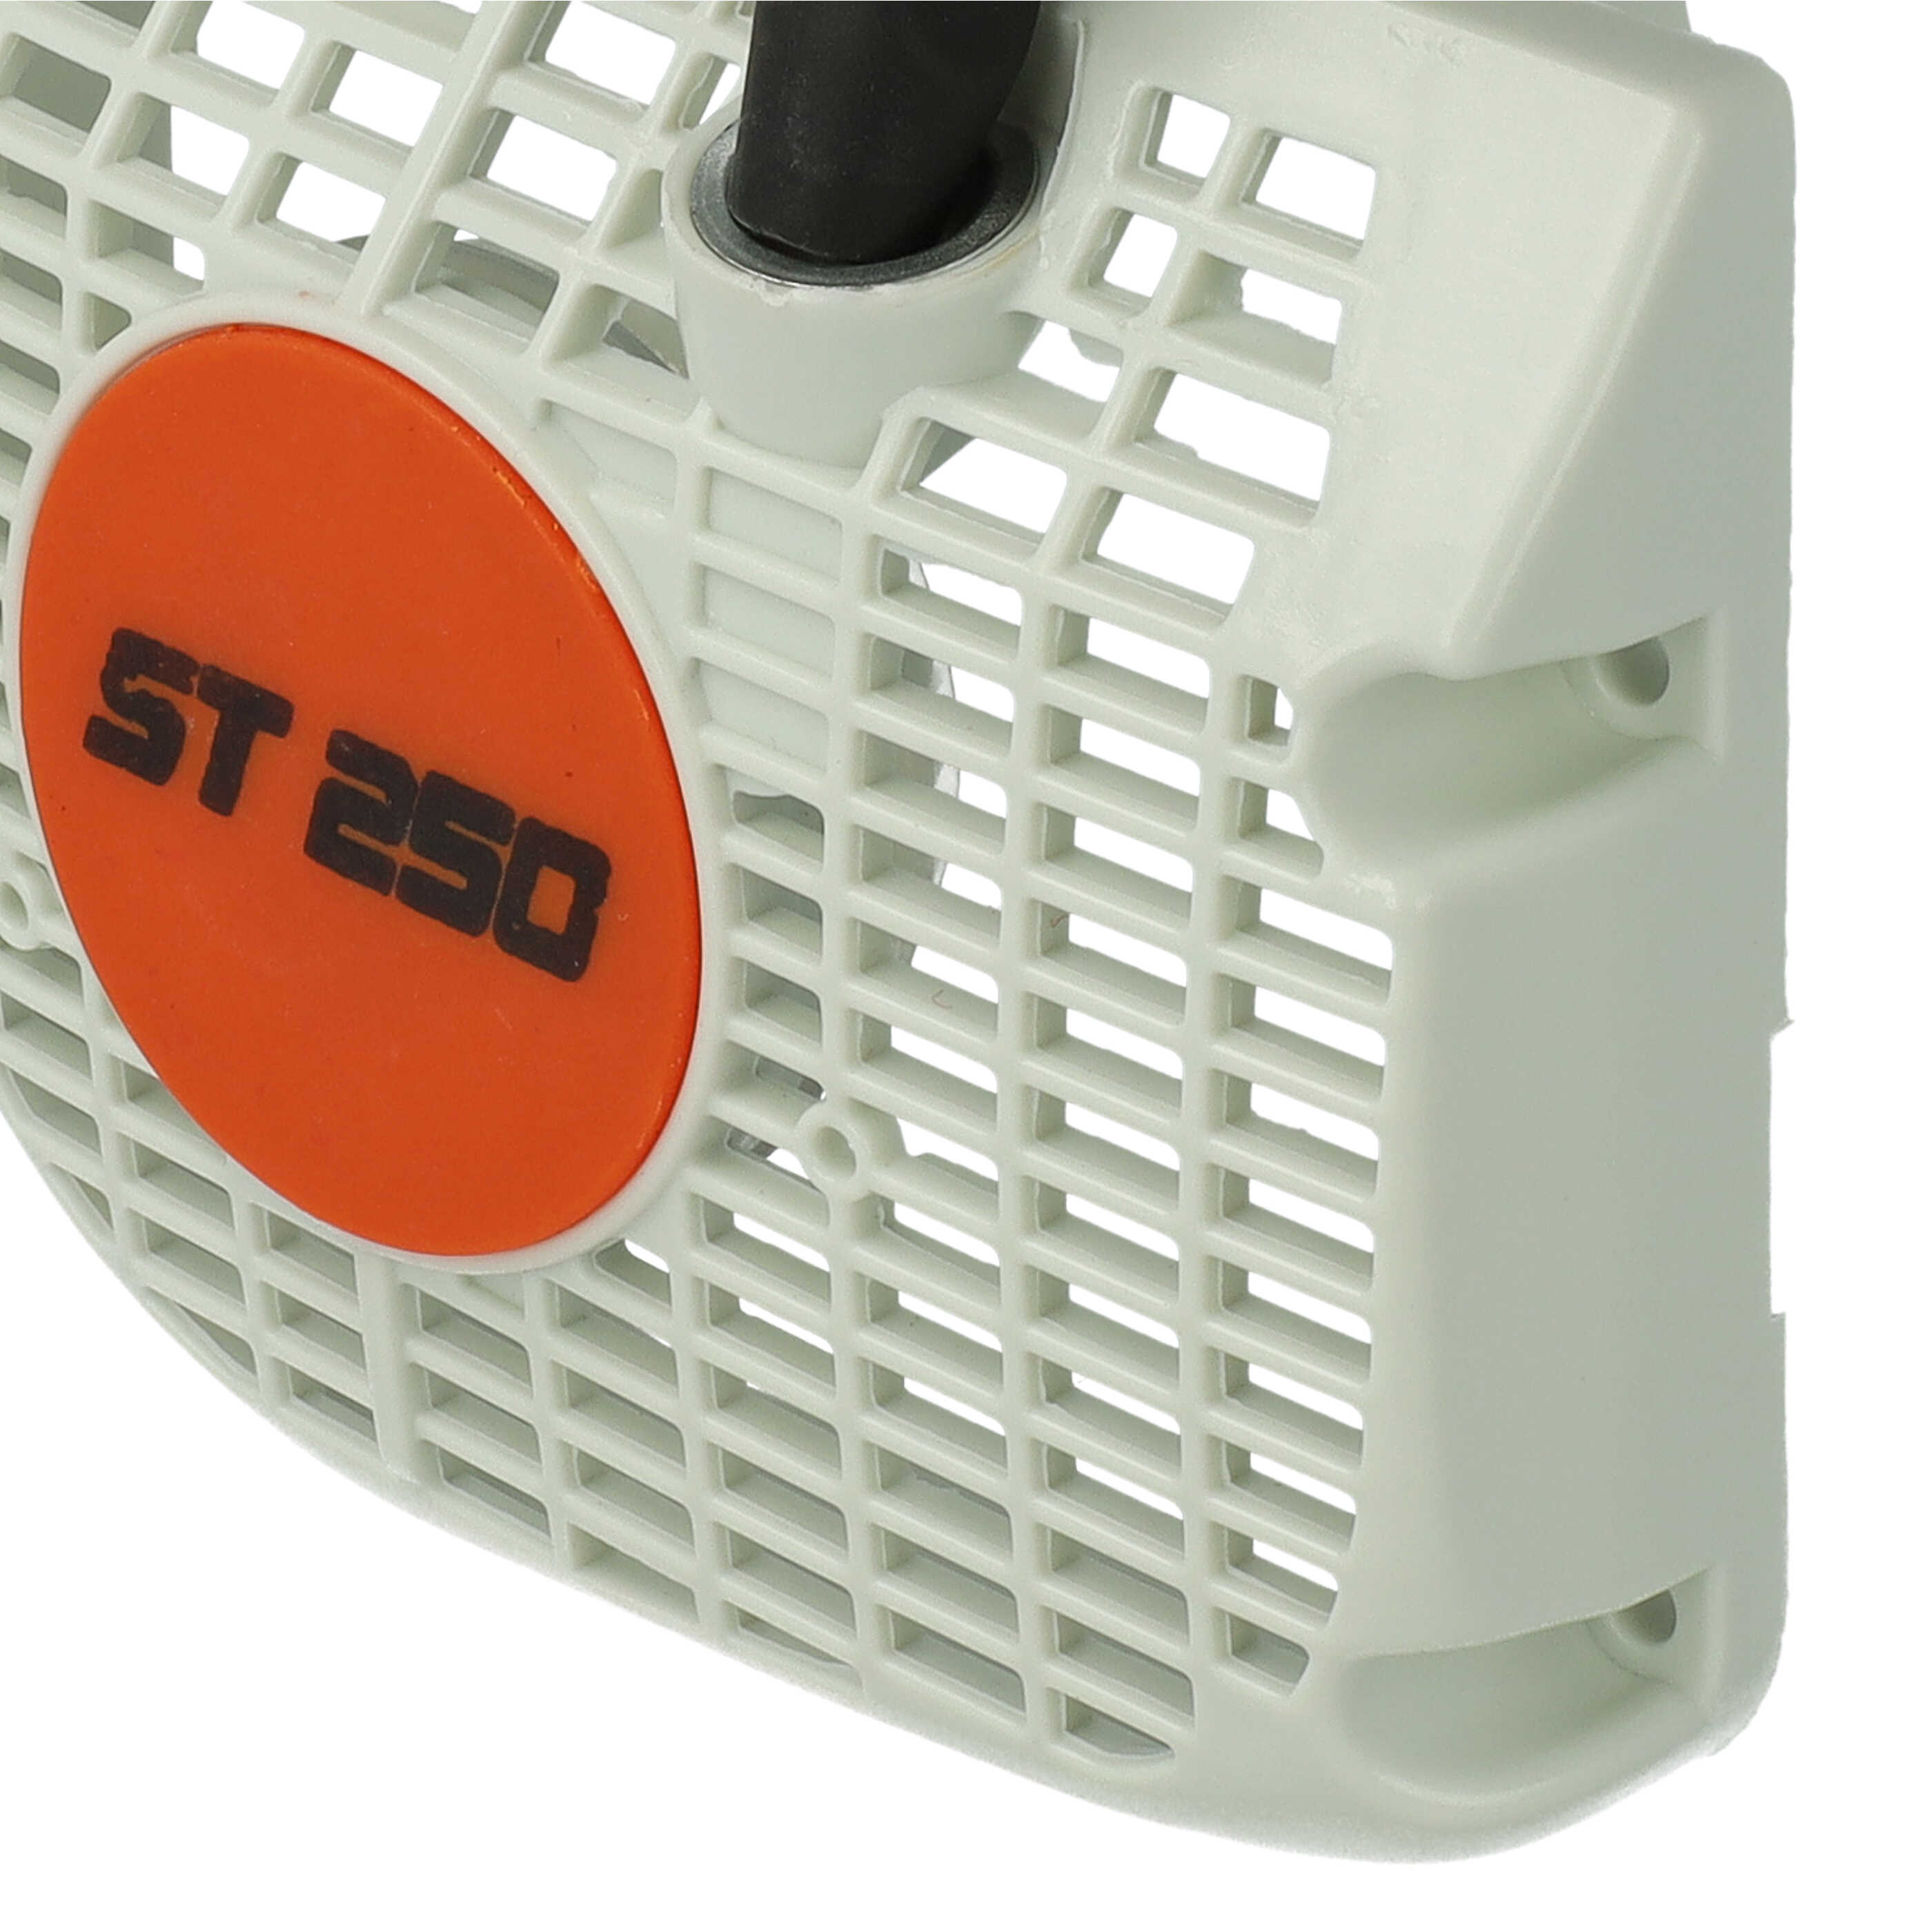 Recoil Starter as Replacement for Stihl 1123-080-1802 suitable for Stihl Power Saw - 16.7 x 13.8 x 3.8 cm